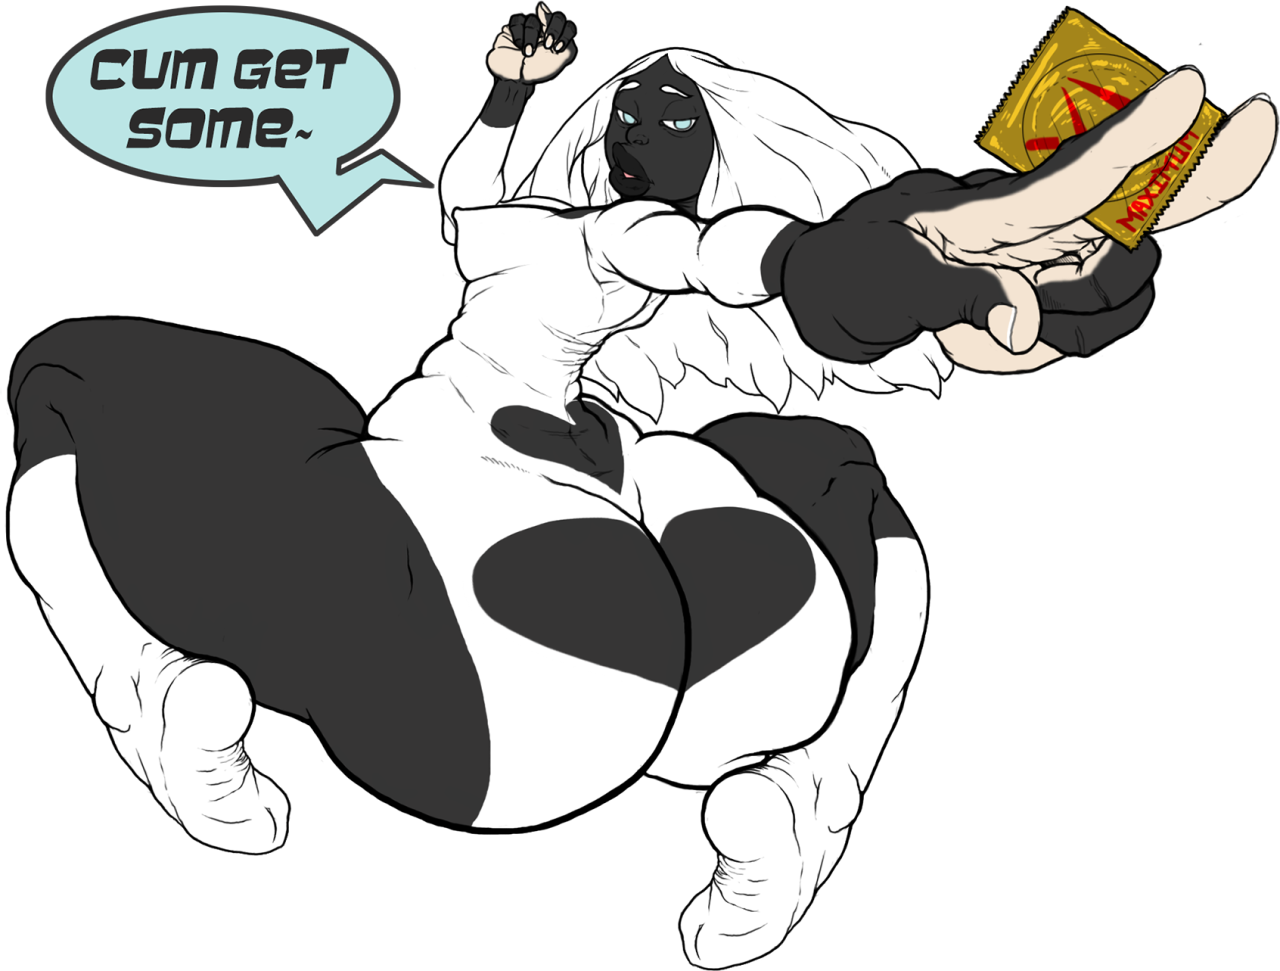 moccafiend: The pitch black phat booty of Viola. She belongs to http://cheezyweapon.tumblr.com/